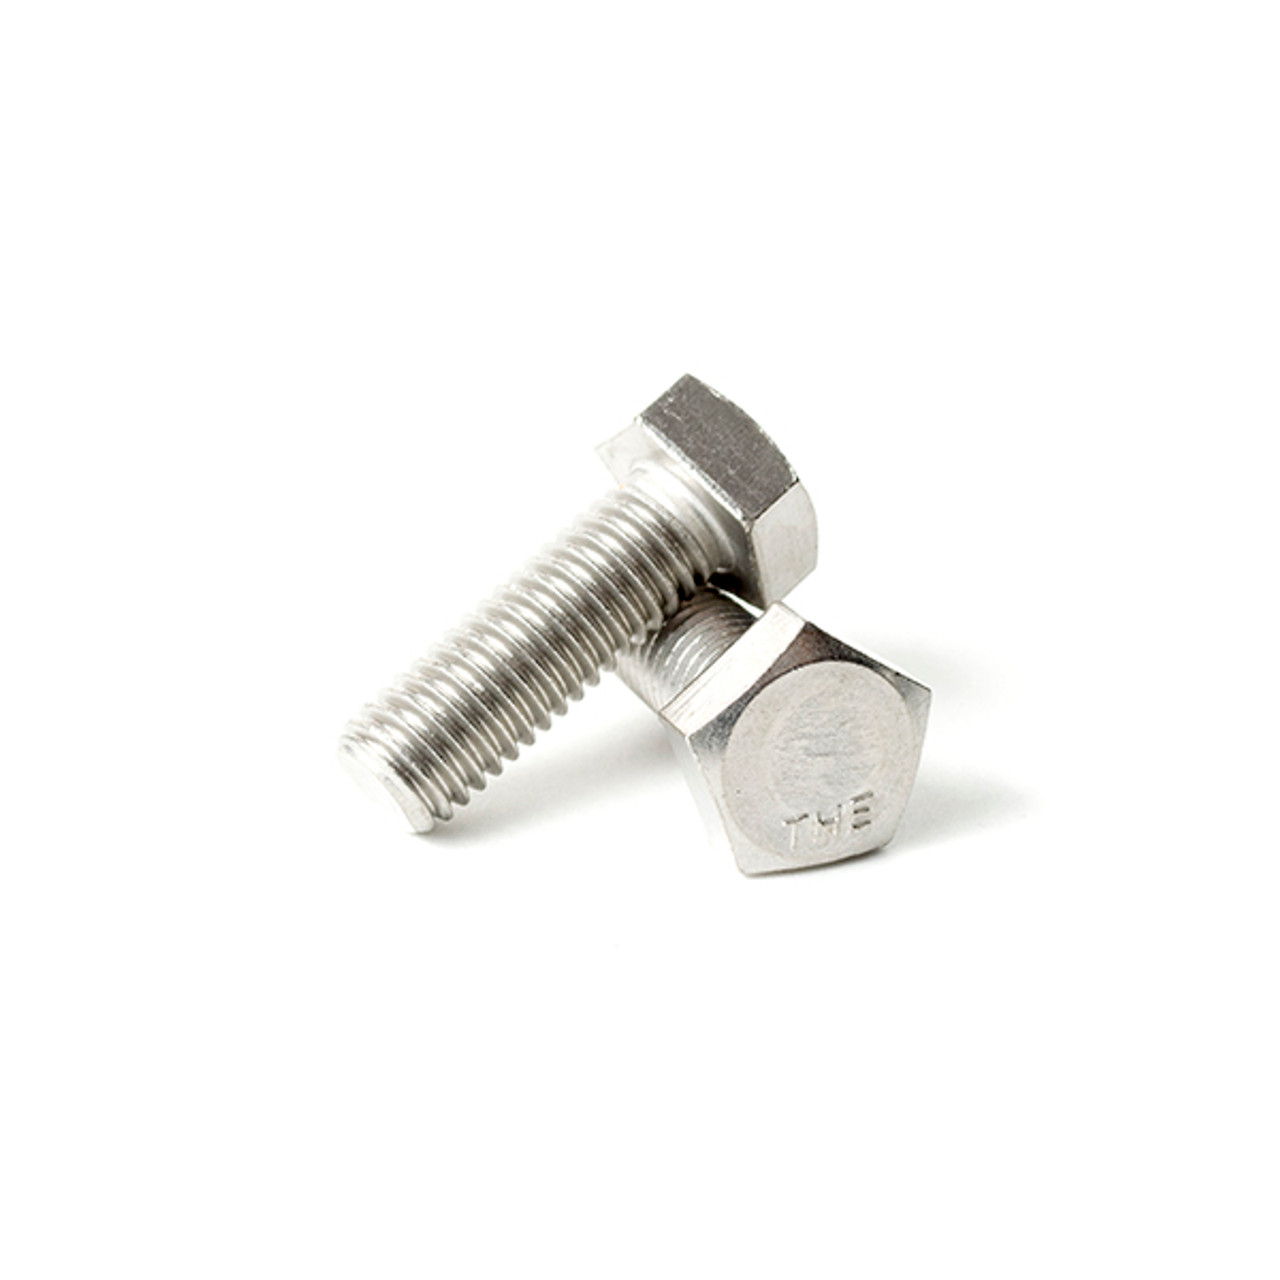 Stainless Steel 316 3/8 Turnbuckle Hook and Eye with Locknuts 3/8